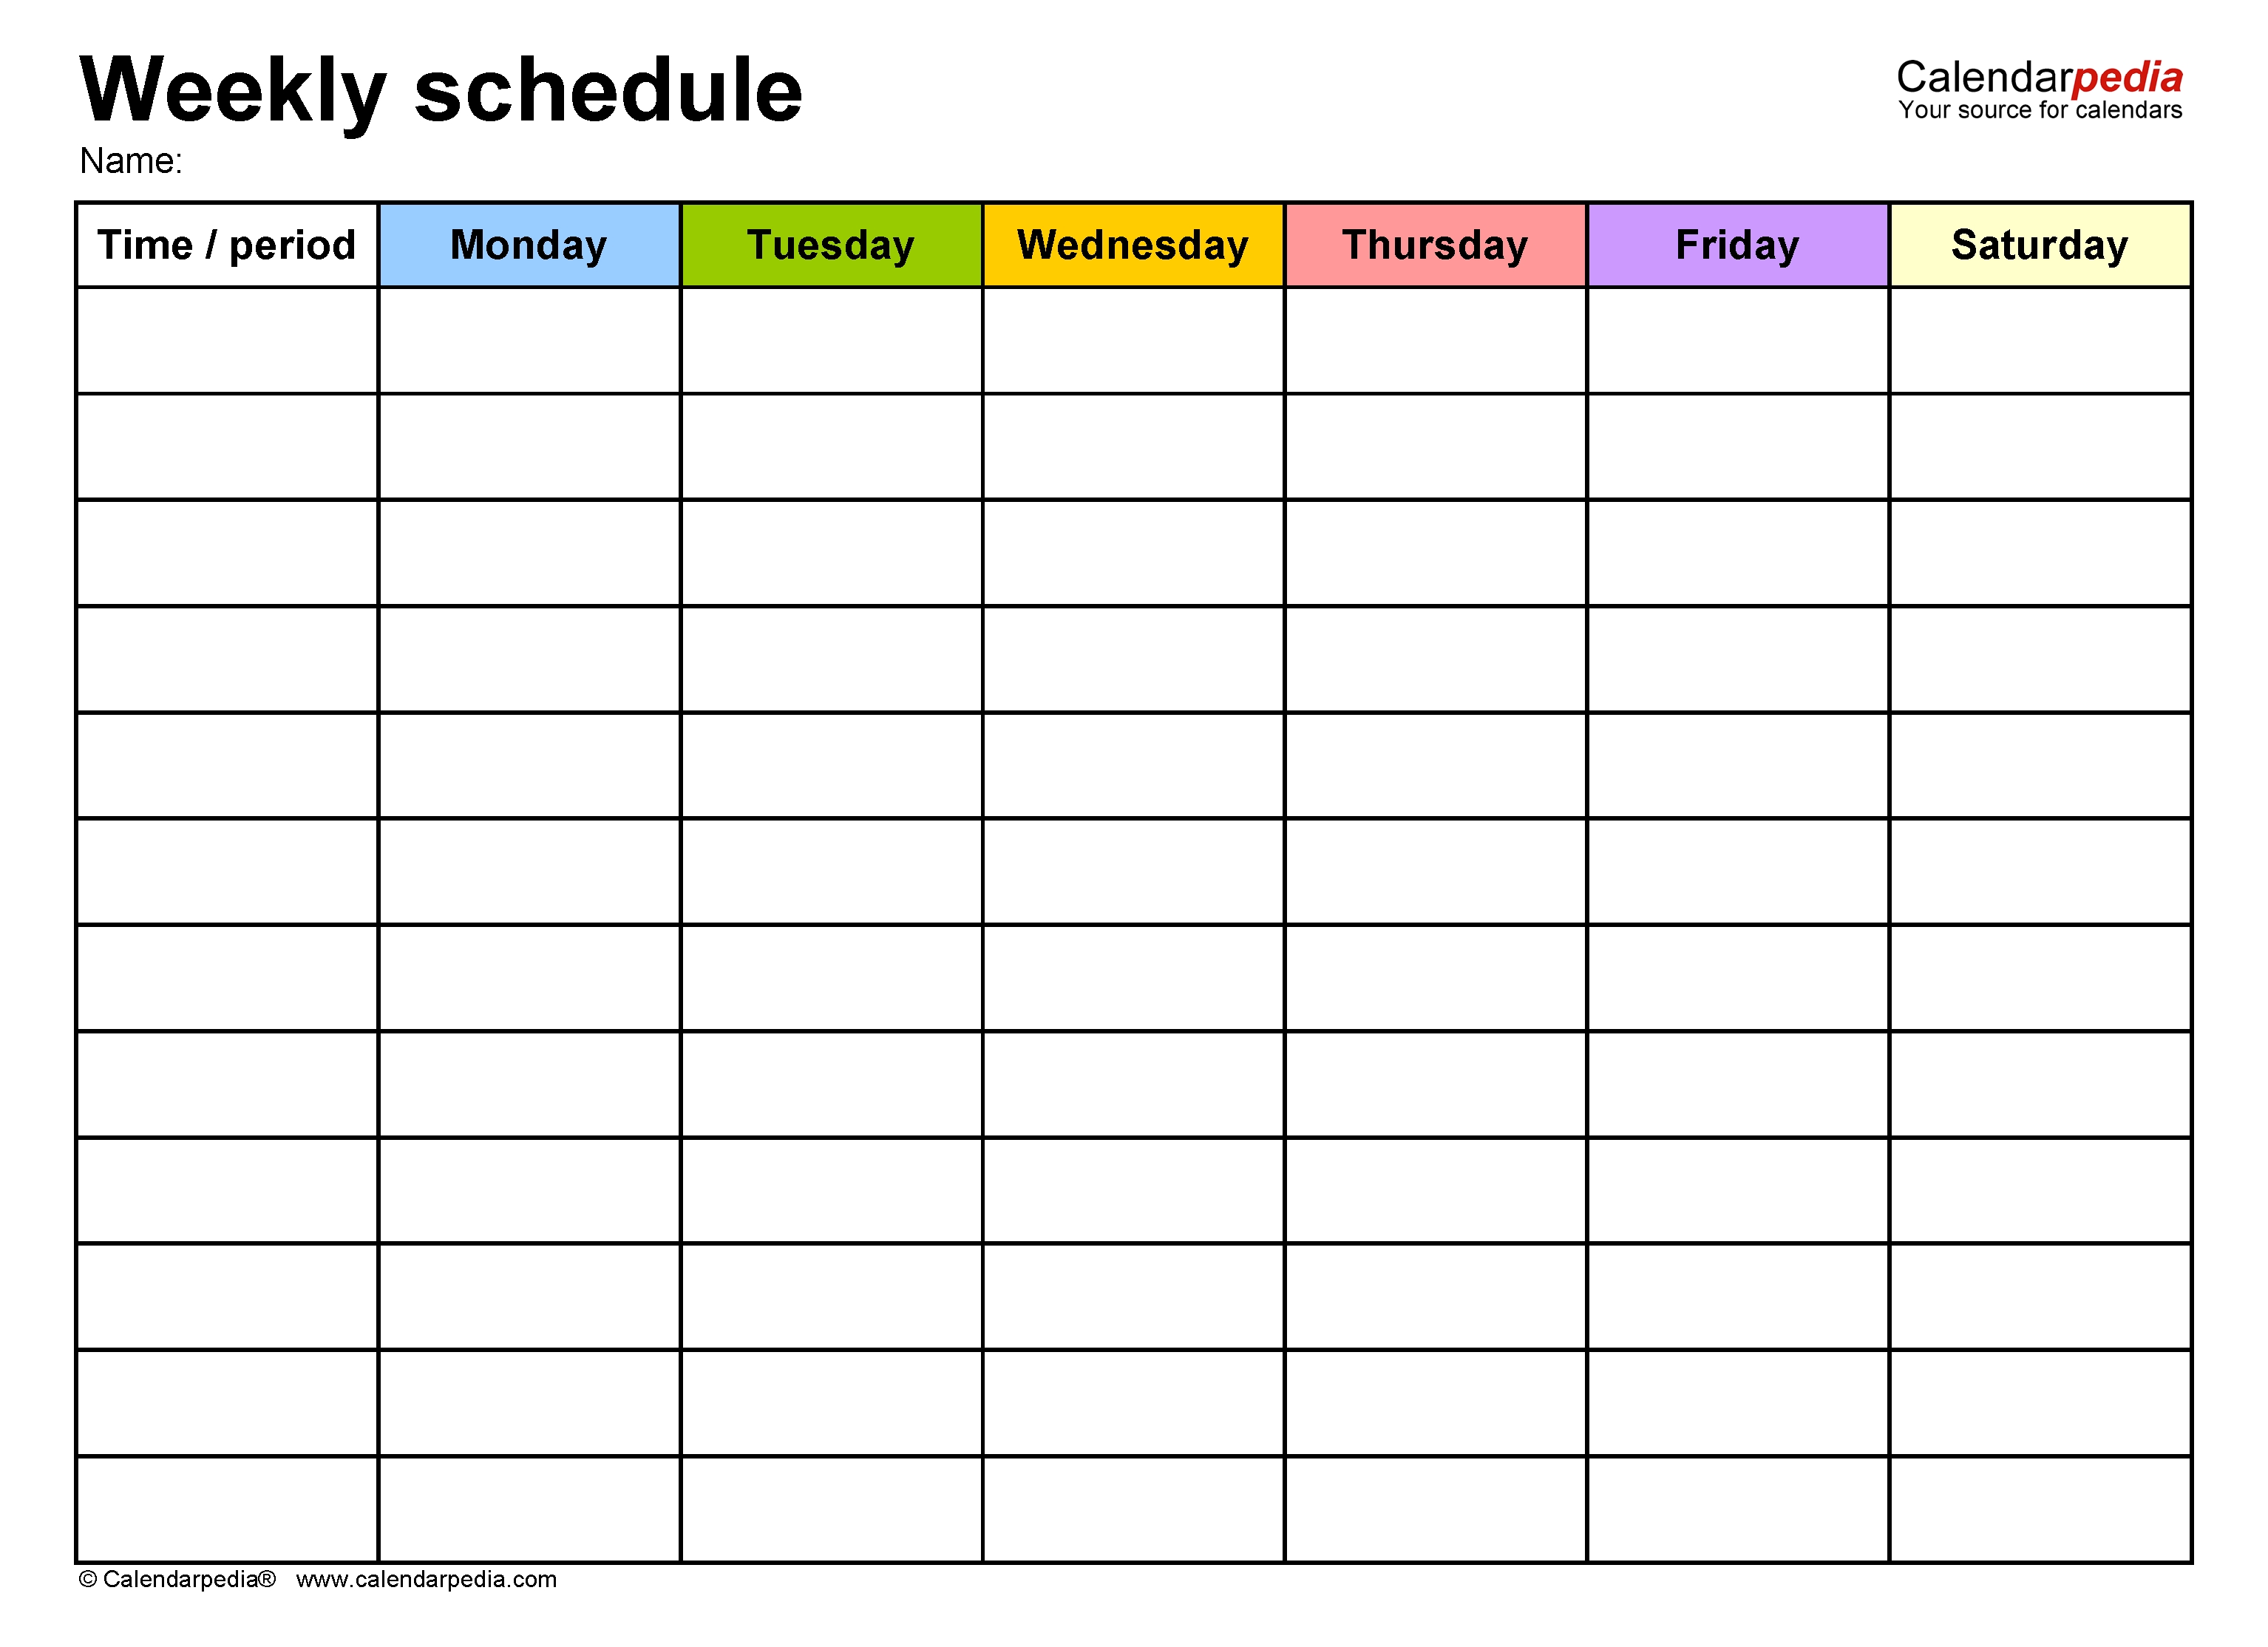 Free Weekly Schedule Templates For Word - 18 Templates inside Monday Through Friday Appointment Calendar